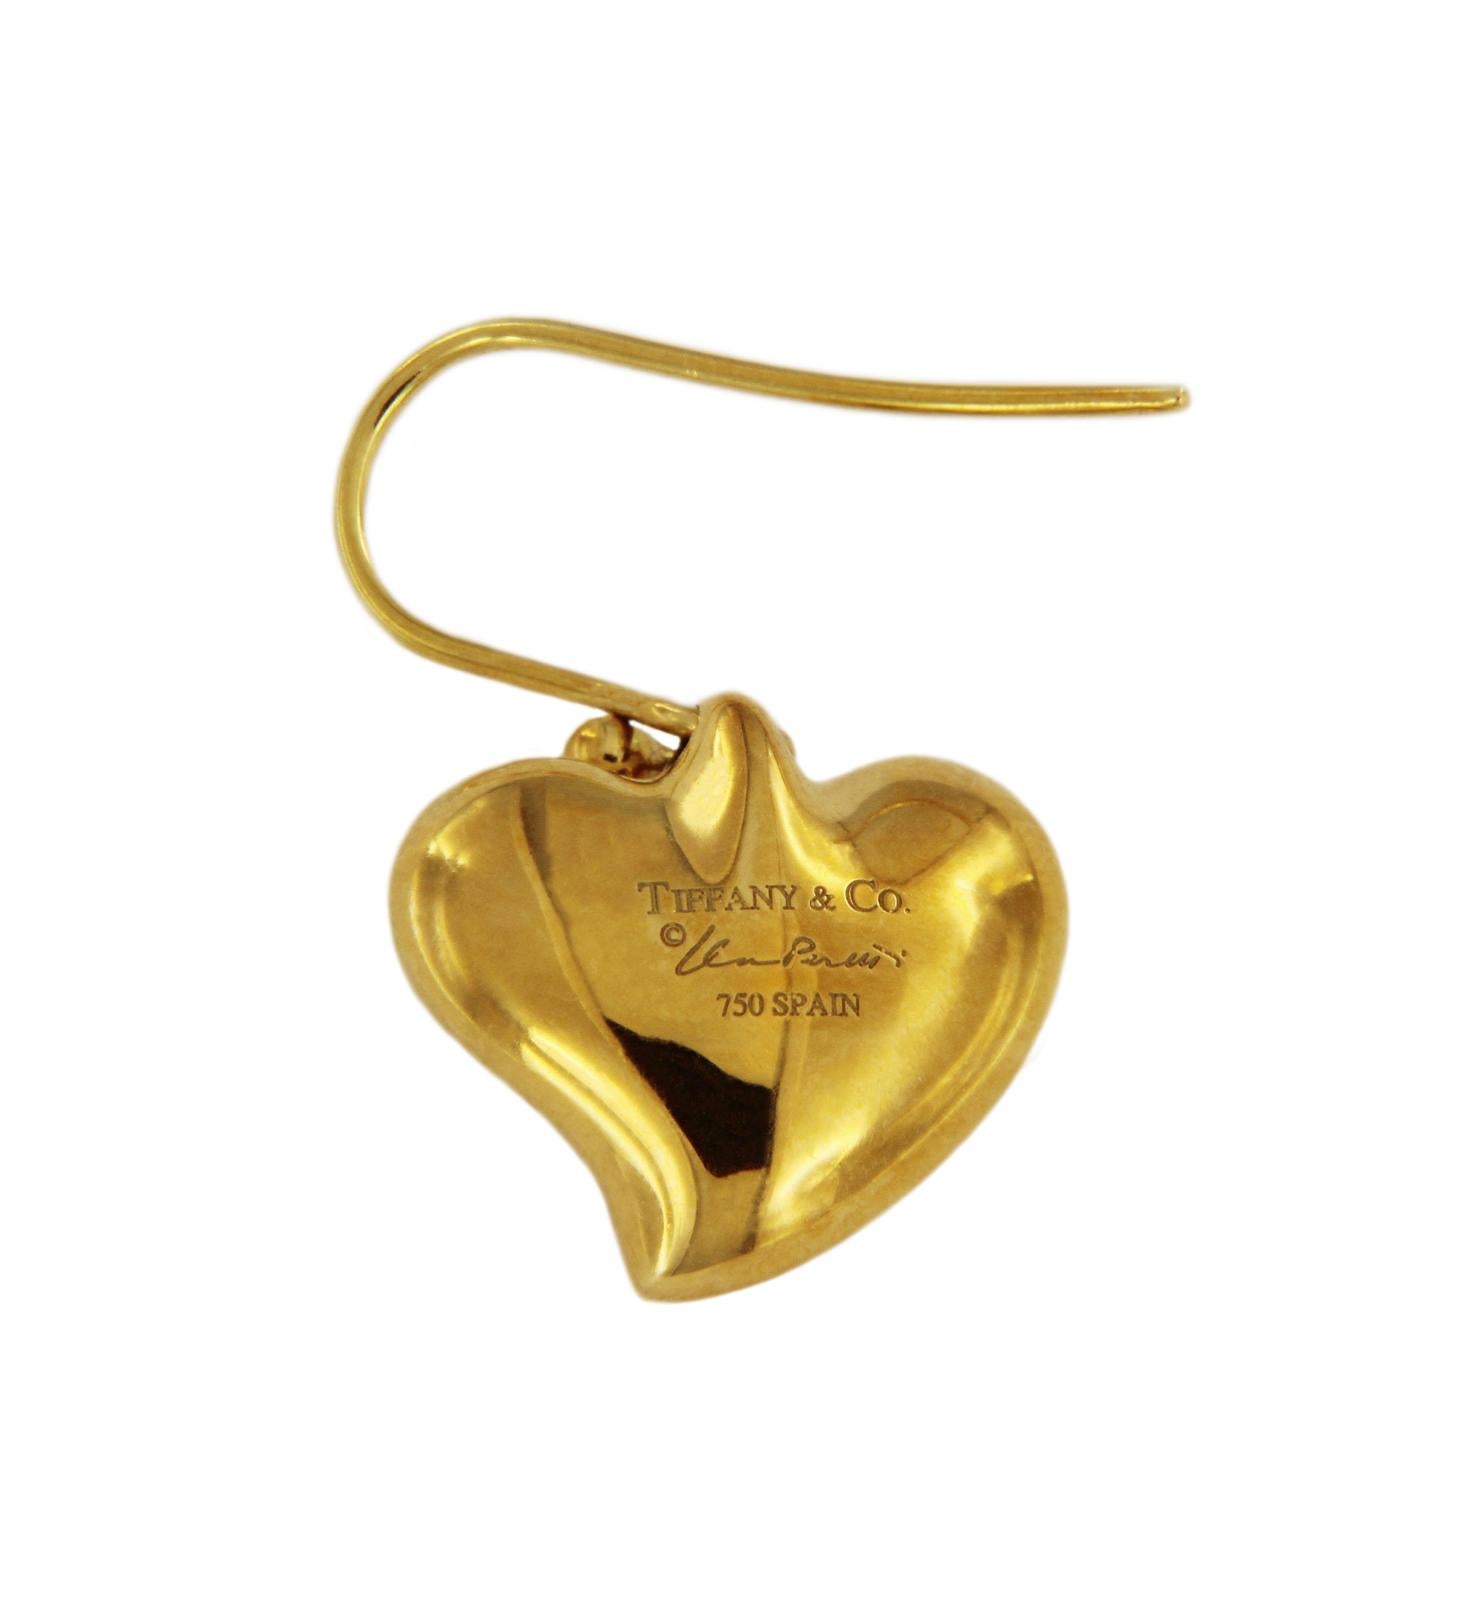 TIFFANY & CO. ELSA PERETTI GOLD HEART DROP EARRINGS

-Condition: Mint 
-Material: 18k Yellow Gold
-Heart dimension: 12x14mm
-Weight: 9.4gr
-Hallmarked: “Stamped 750 and Spain”
Comes with Tiffany pouch. 